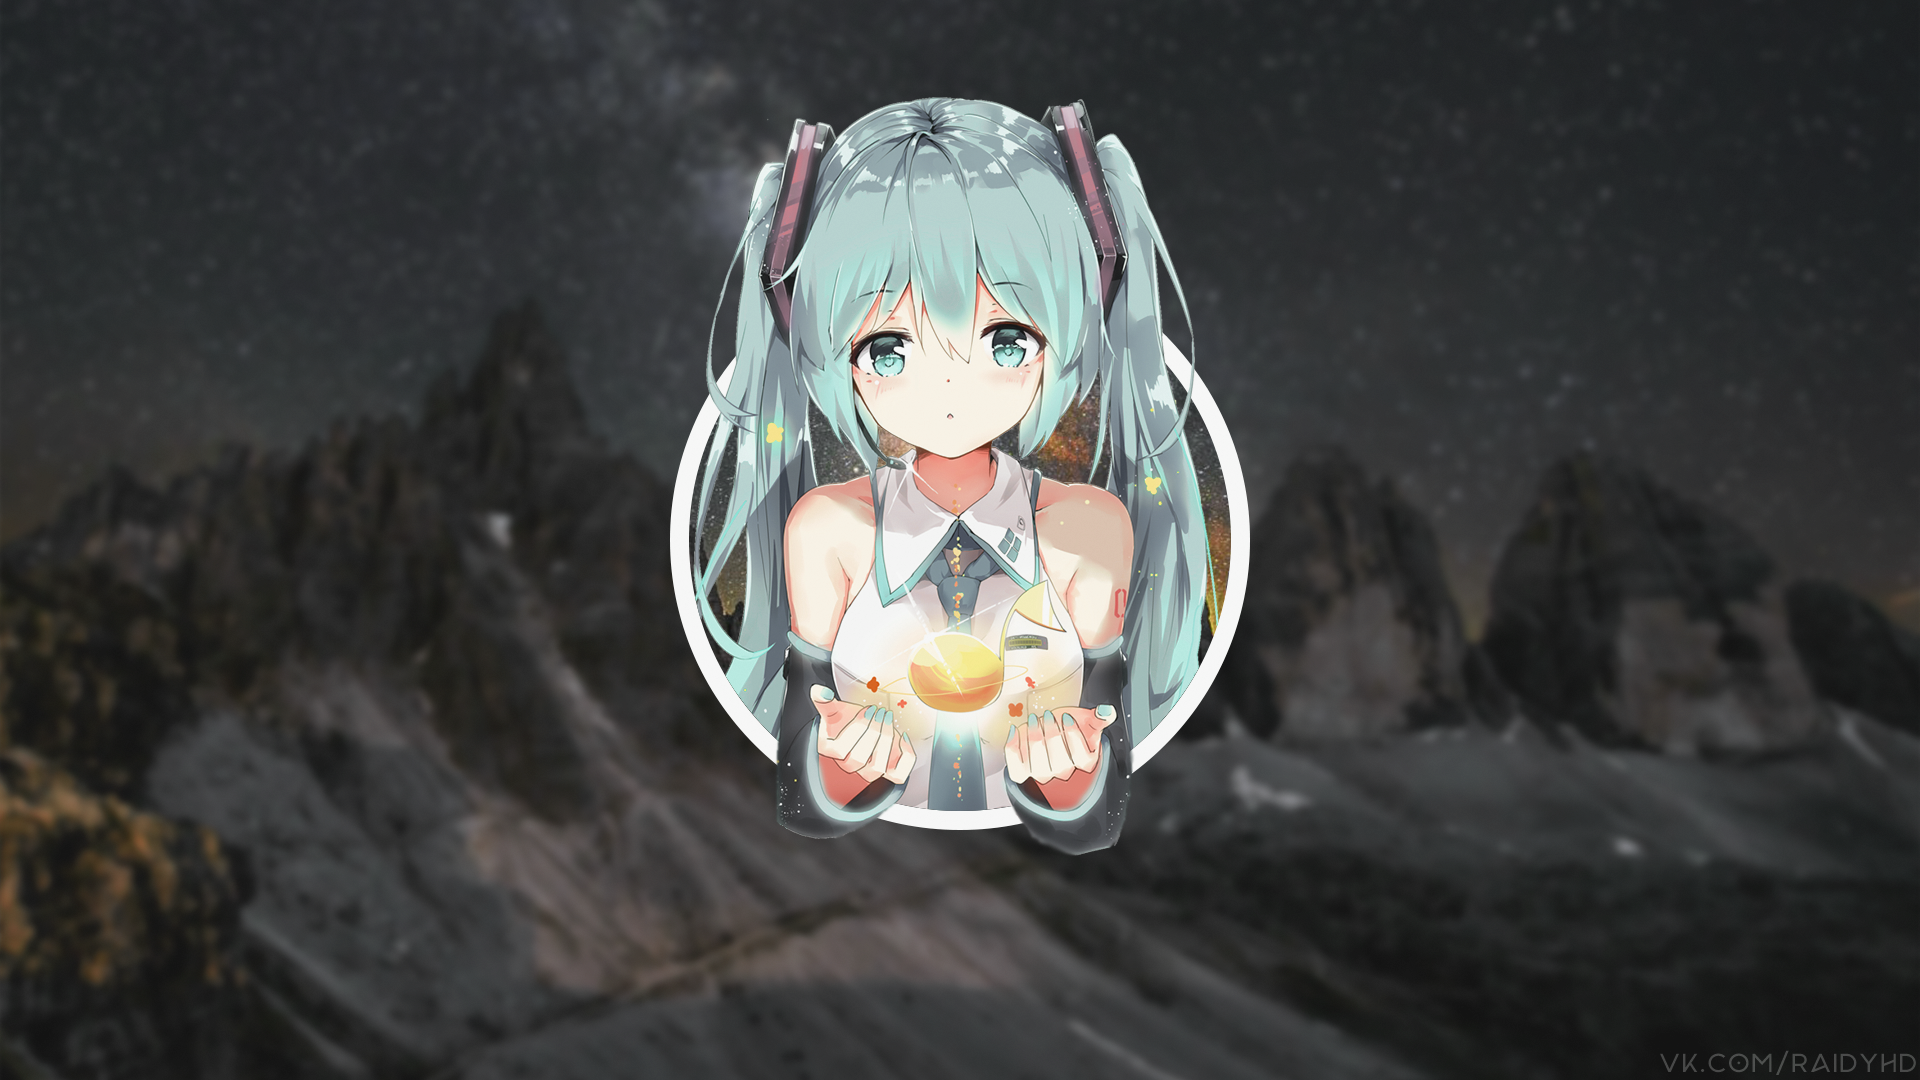 Anime 1920x1080 anime anime girls Hatsune Miku picture-in-picture Vocaloid watermarked